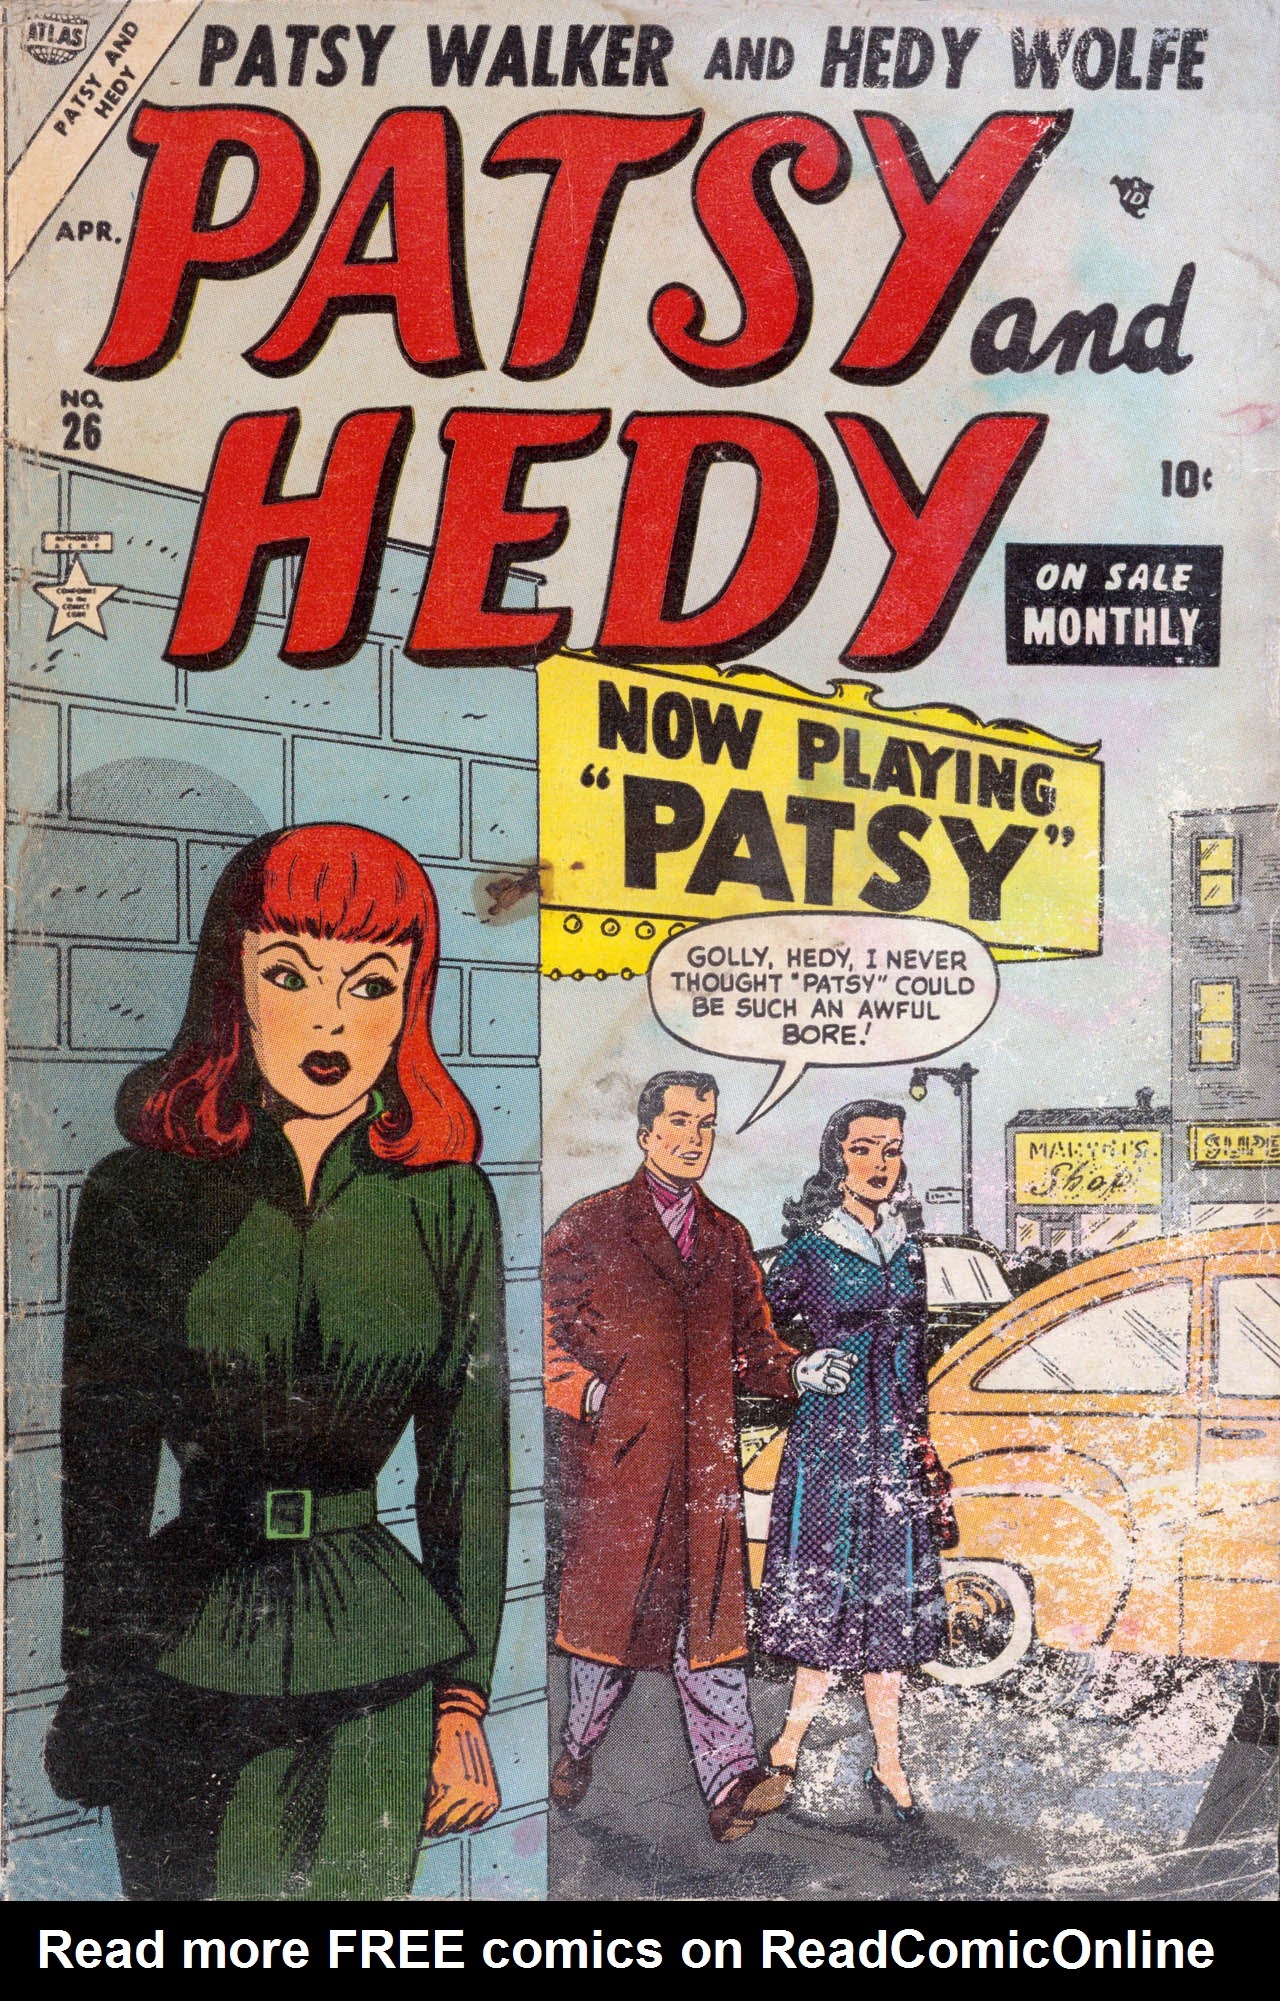 Read online Patsy and Hedy comic -  Issue #26 - 1